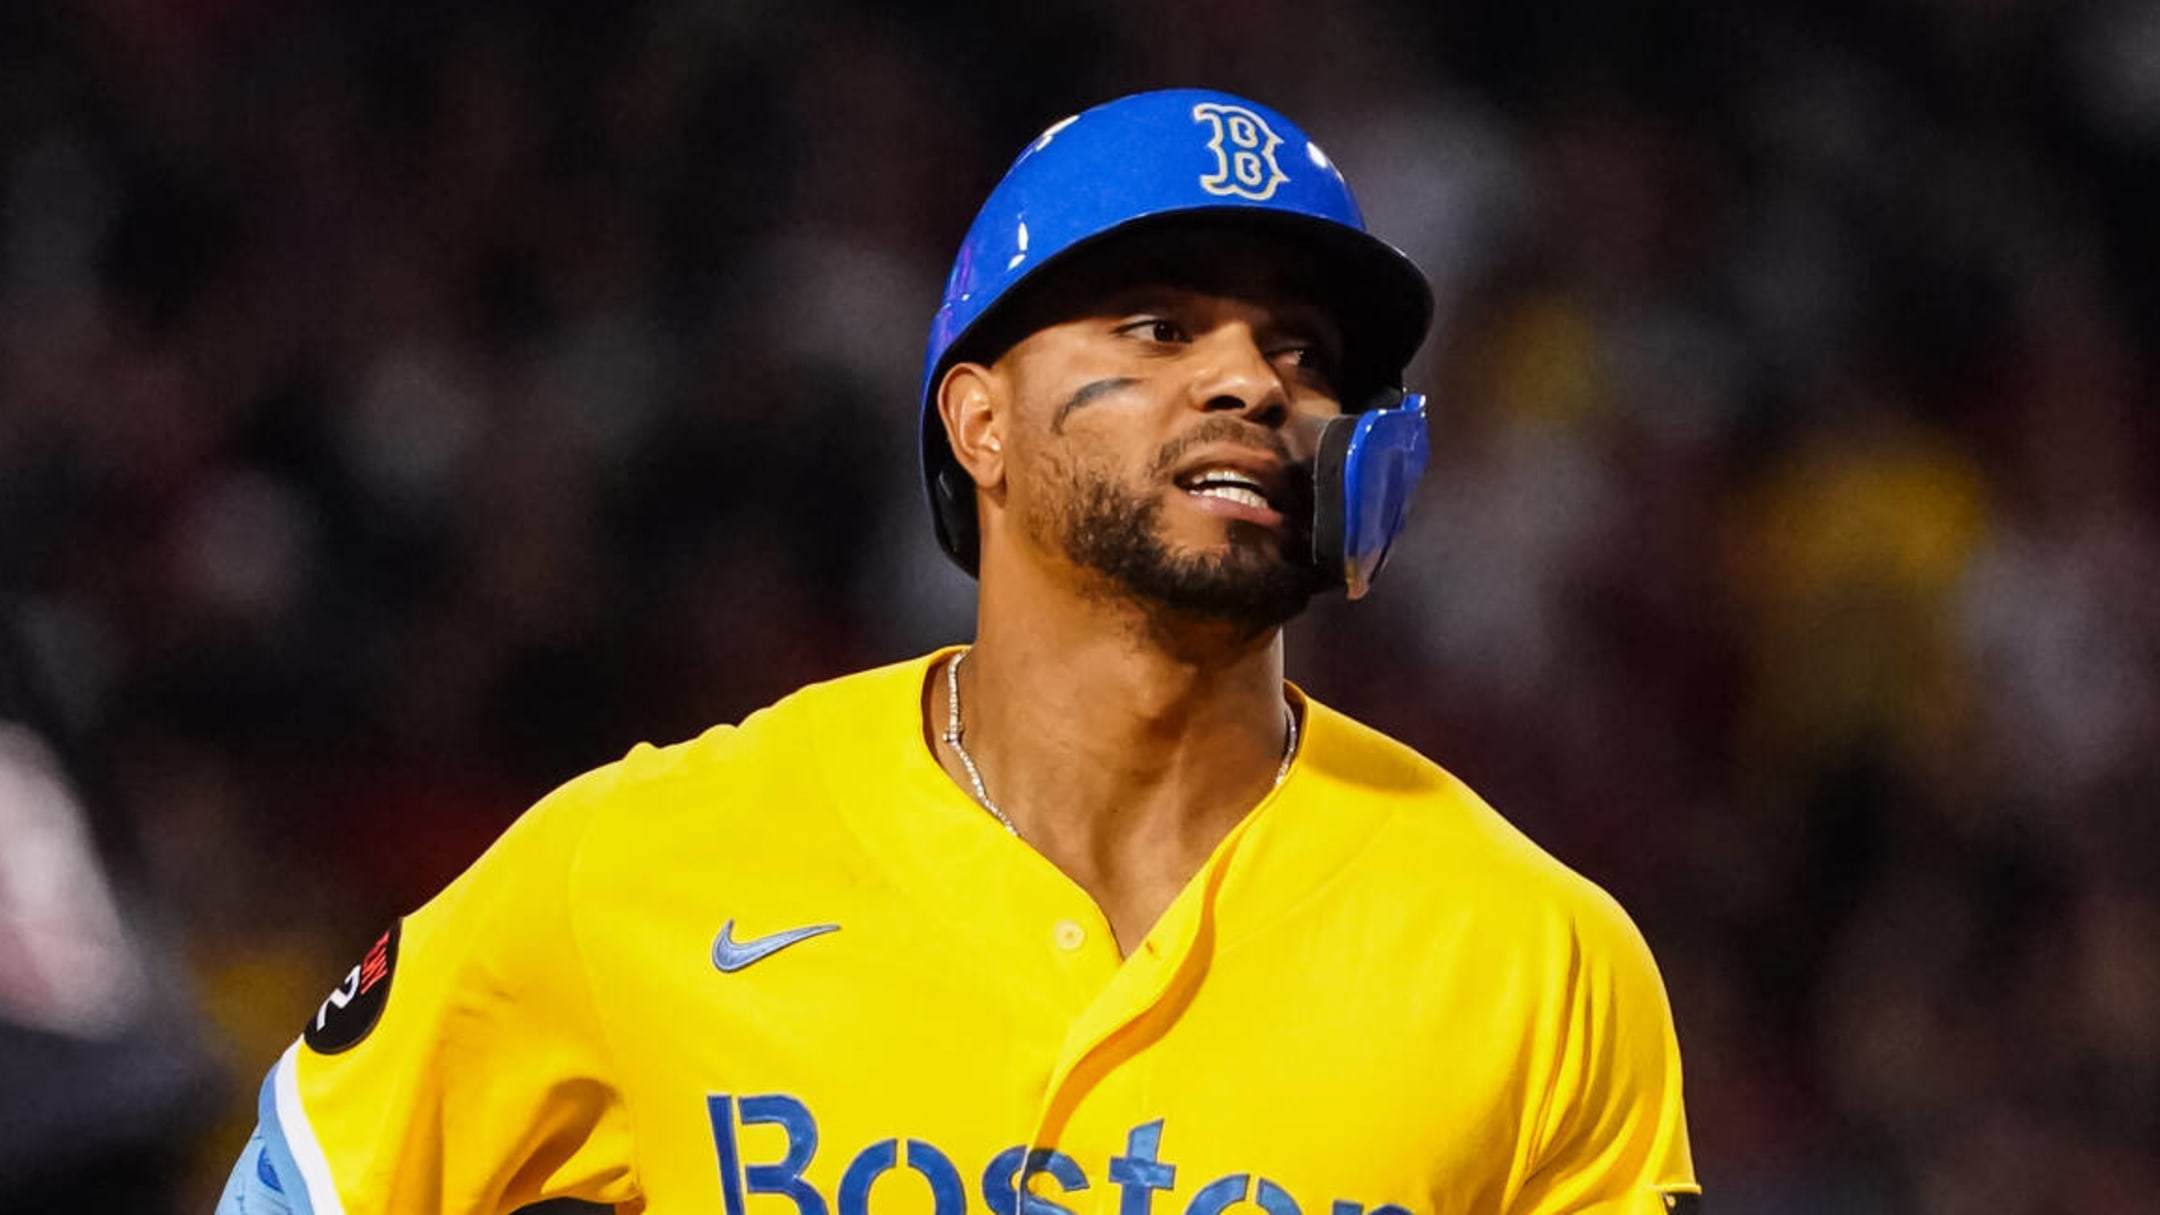 MLB Network on X: BREAKING: Xander Bogaerts is reportedly heading